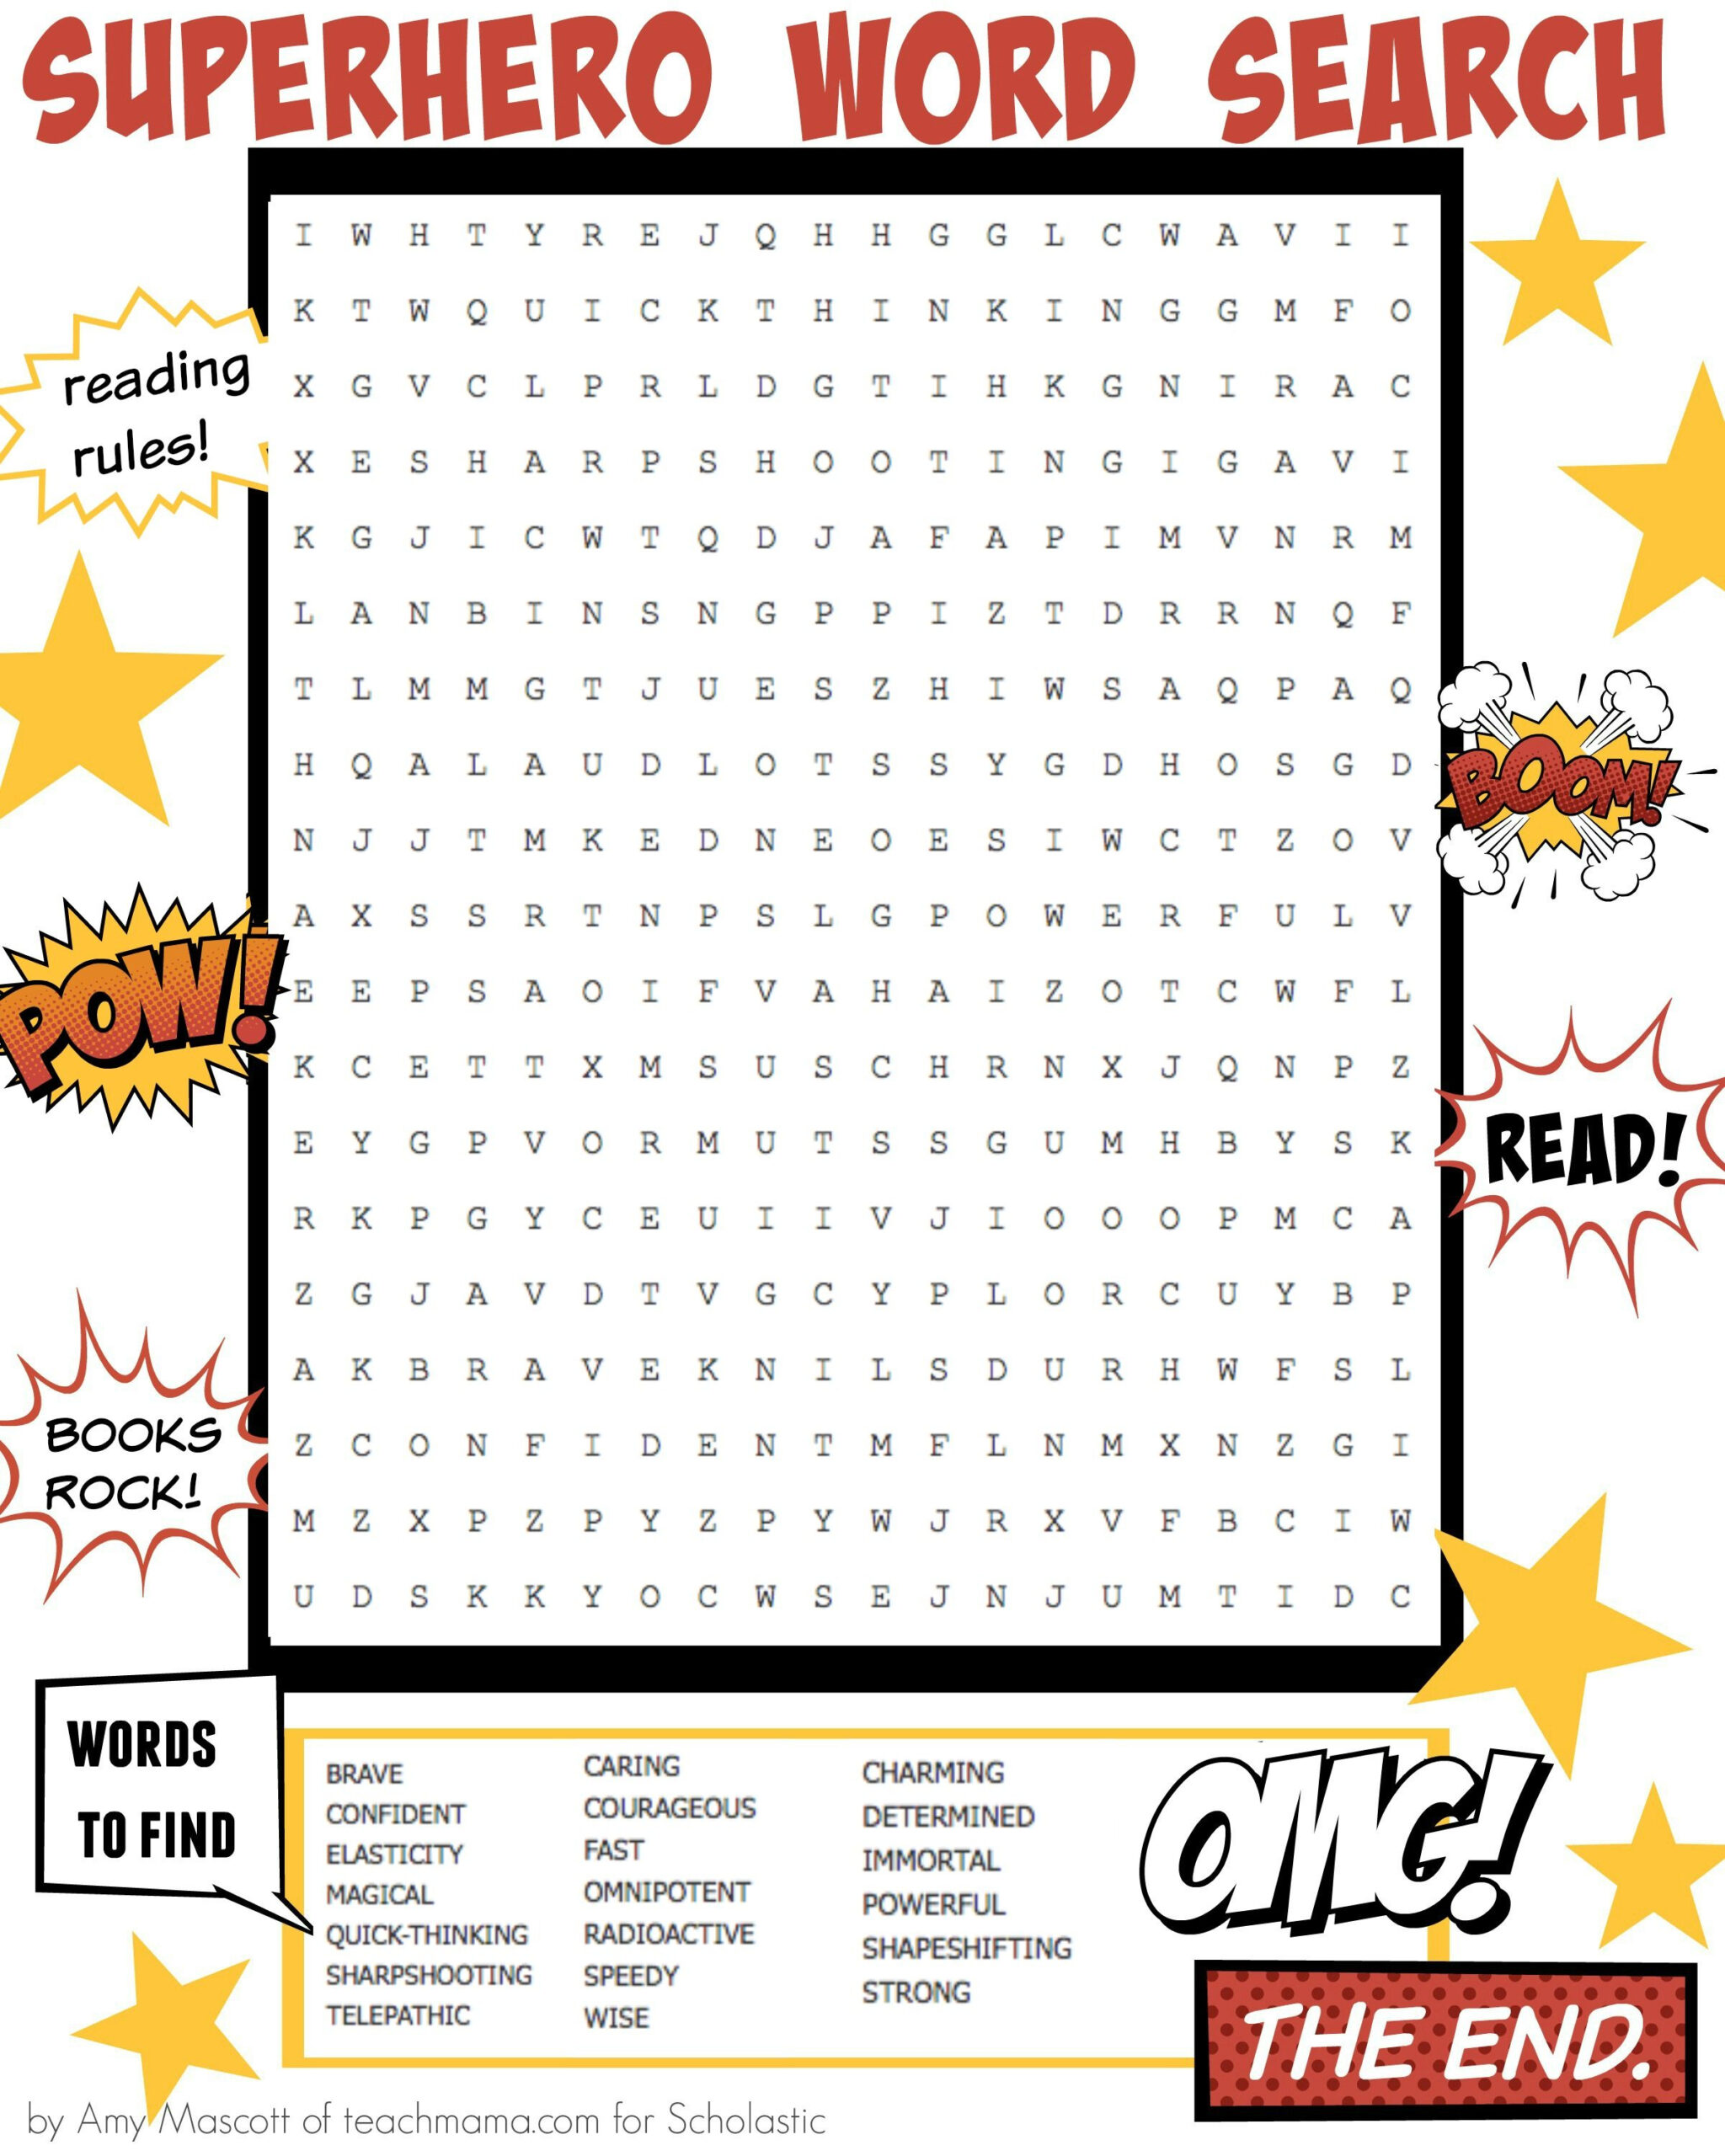 Bam Pow This Superhero Word Search Builds An Epic Vocabulary Http 